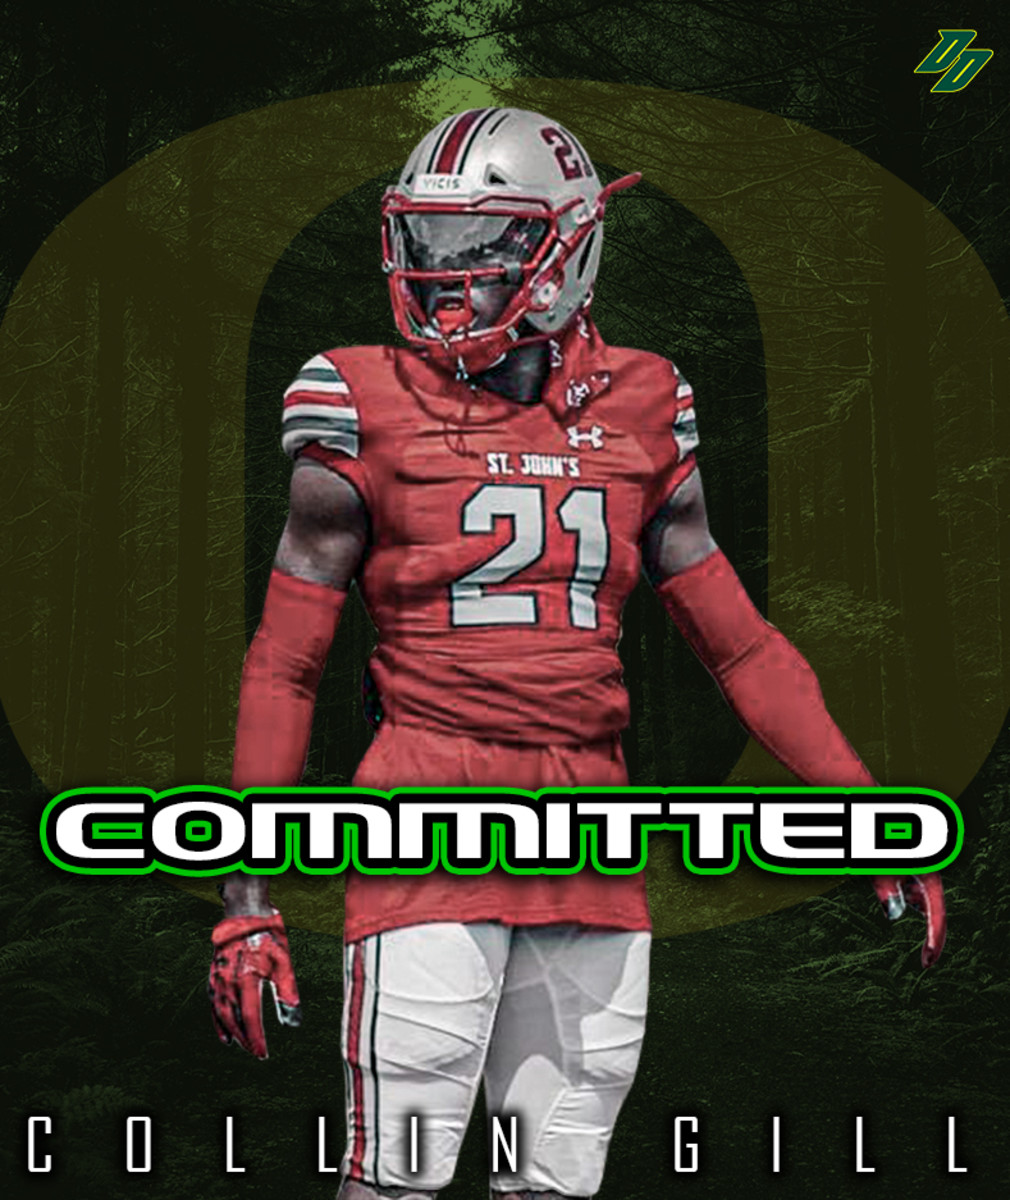 Collin Gill is the second defensive back to commit to Oregon this week along with Texas safety Tyler Turner.